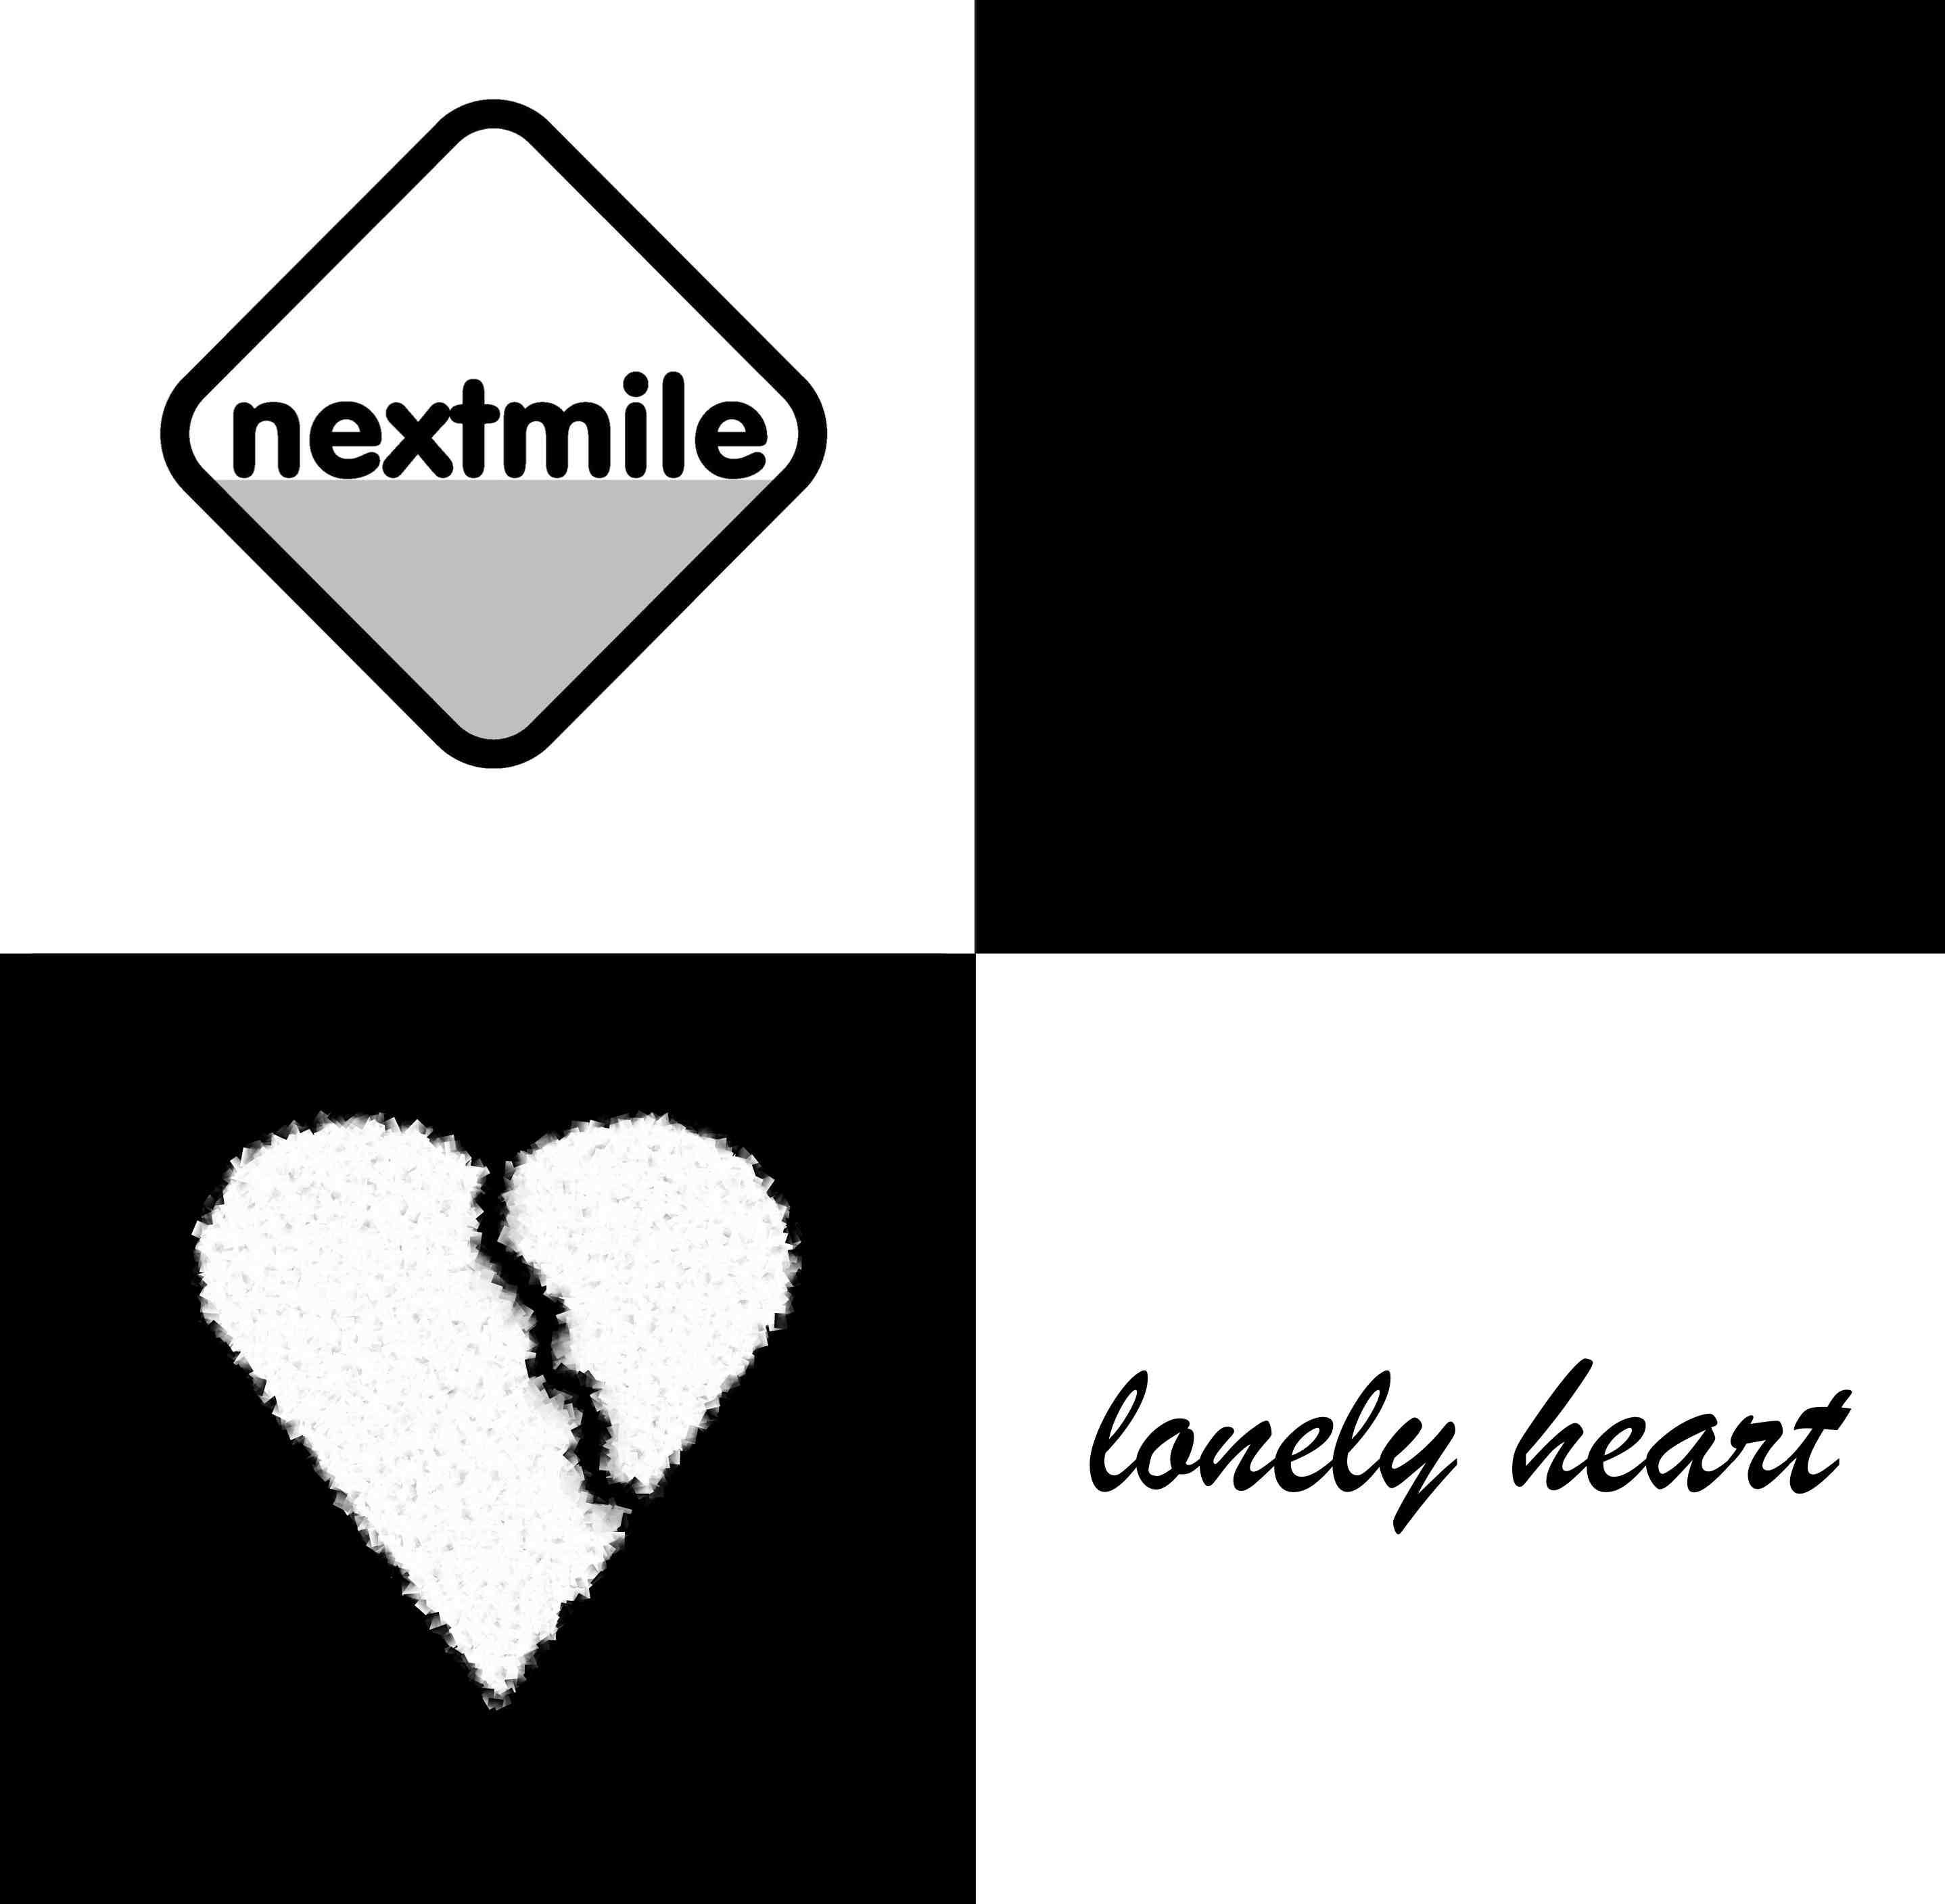 Lonely Hearts. Assix Hearts Extended. Instagram x.Lonely_Heart.x. Lonely Heart(NM/NM).